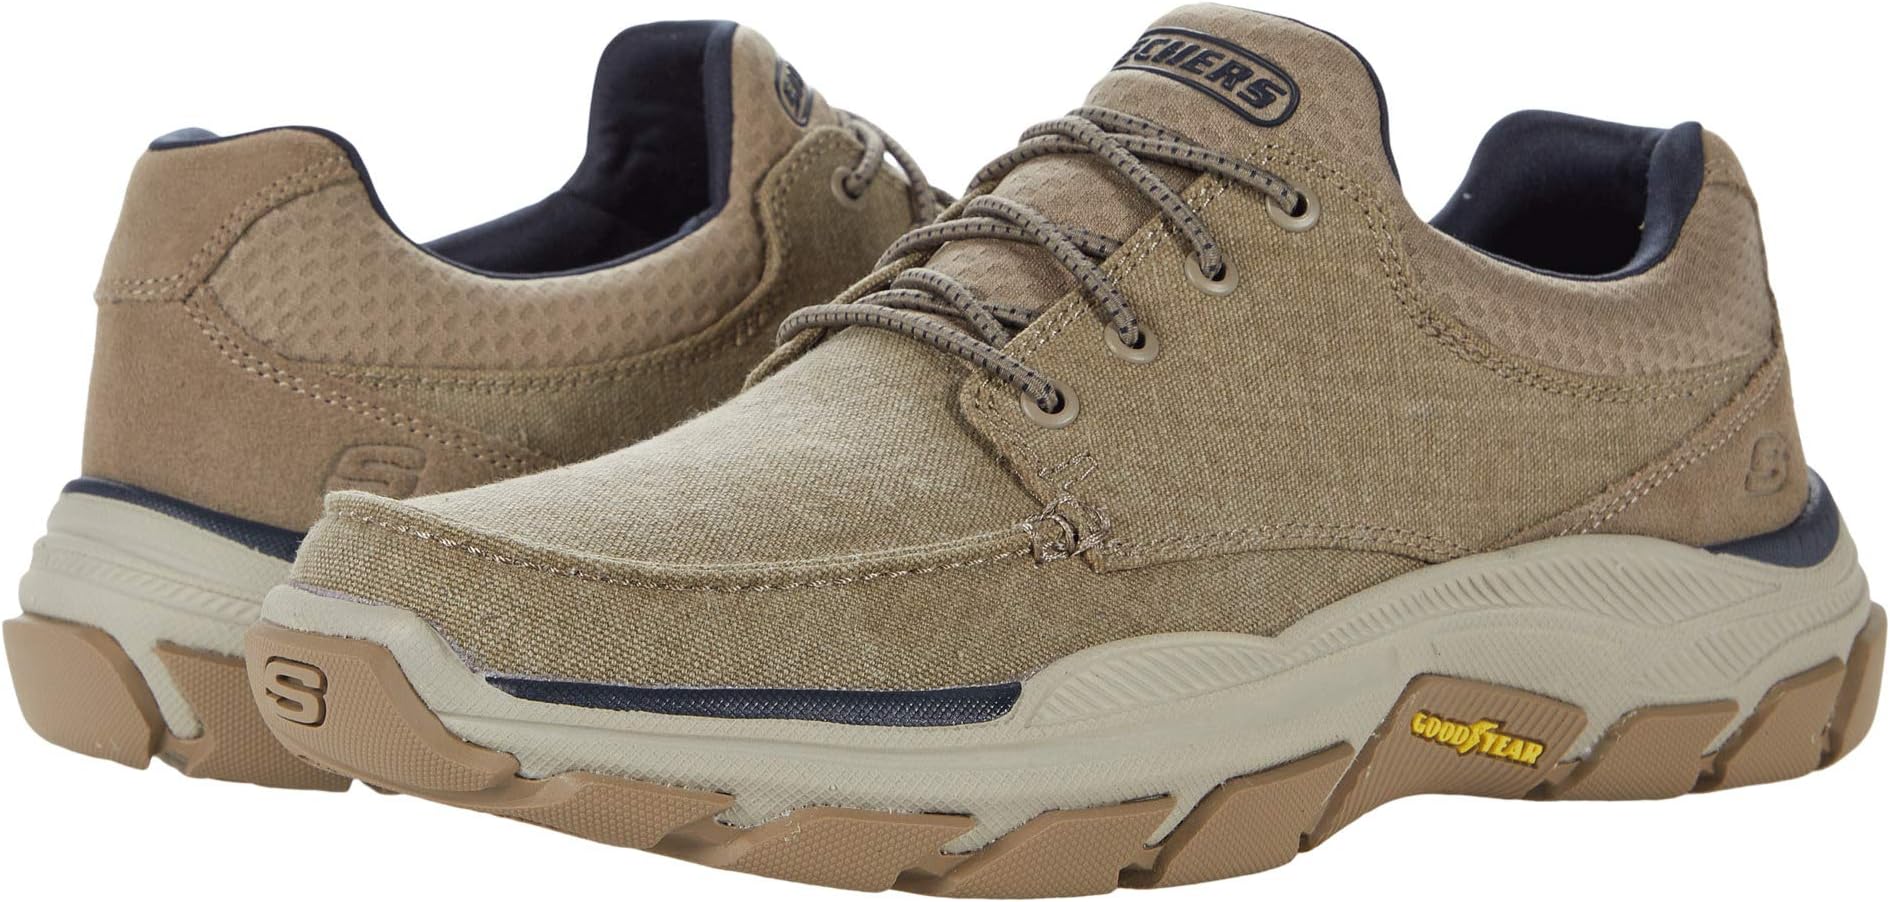 Кроссовки Relaxed Fit Respected - Loleto SKECHERS, серо-коричневый брюки zara relaxed fit серо коричневый